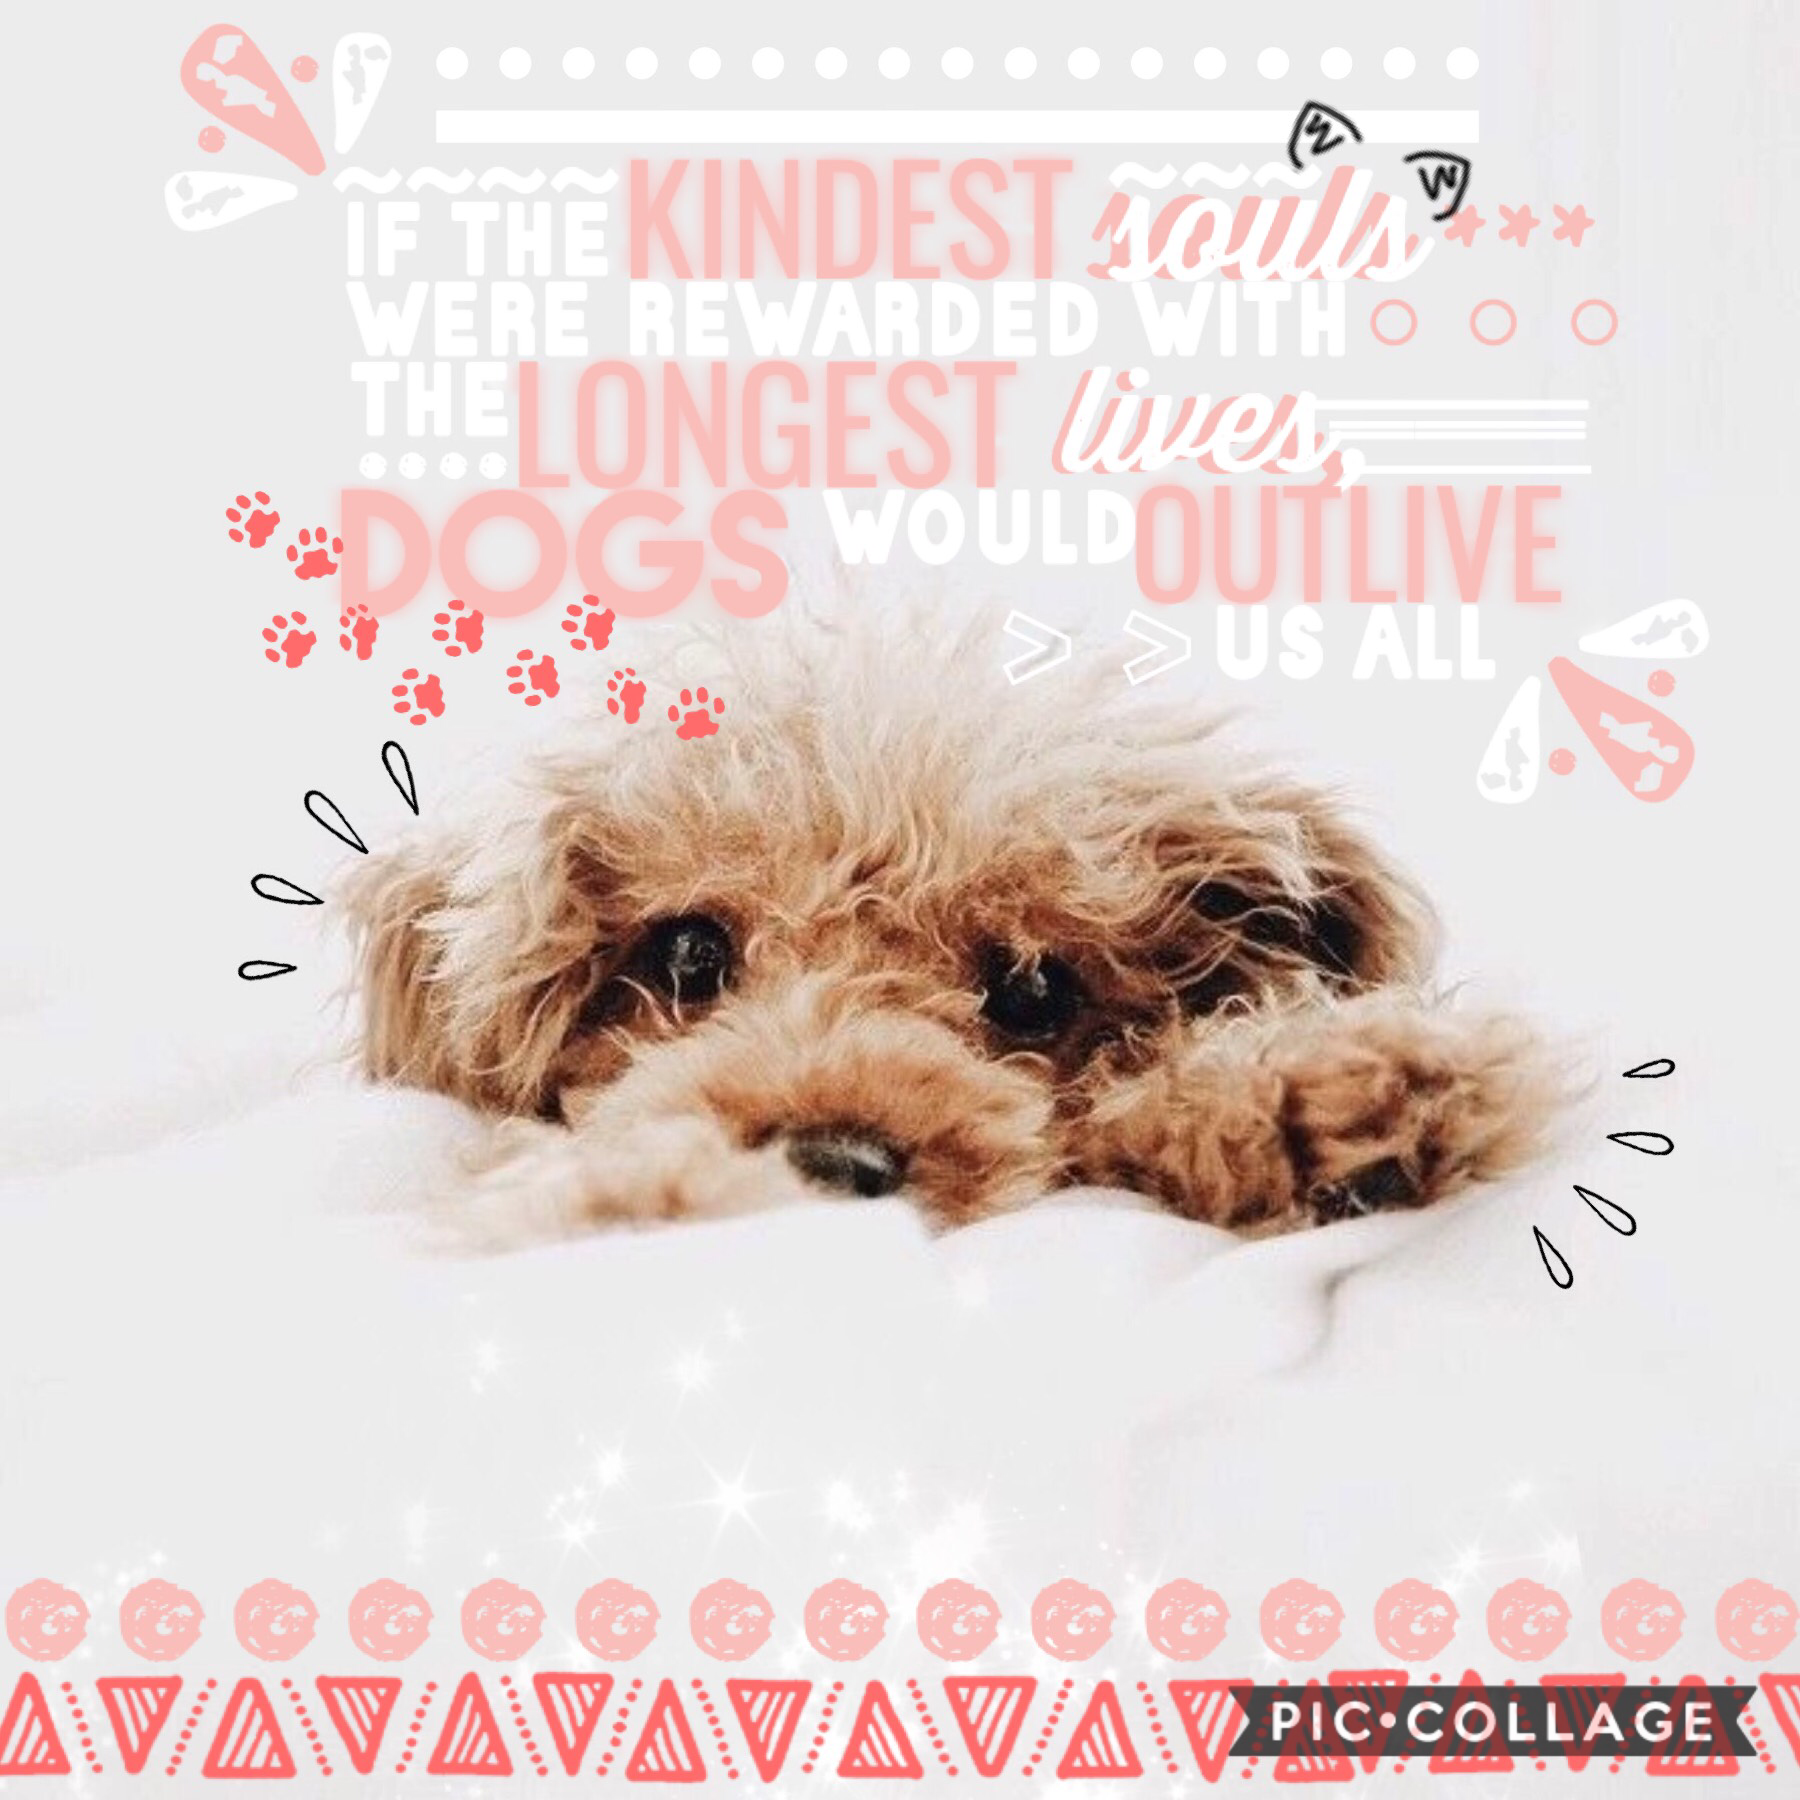 heyo again queens 👑 hope you like this! i just love the dog 😍😍 QOTD: anyone have pinterest and if yes, whats your user? AOTD: yass, add me: twinkling stars ✨ (my account is a bit messy, only started a month ago) 